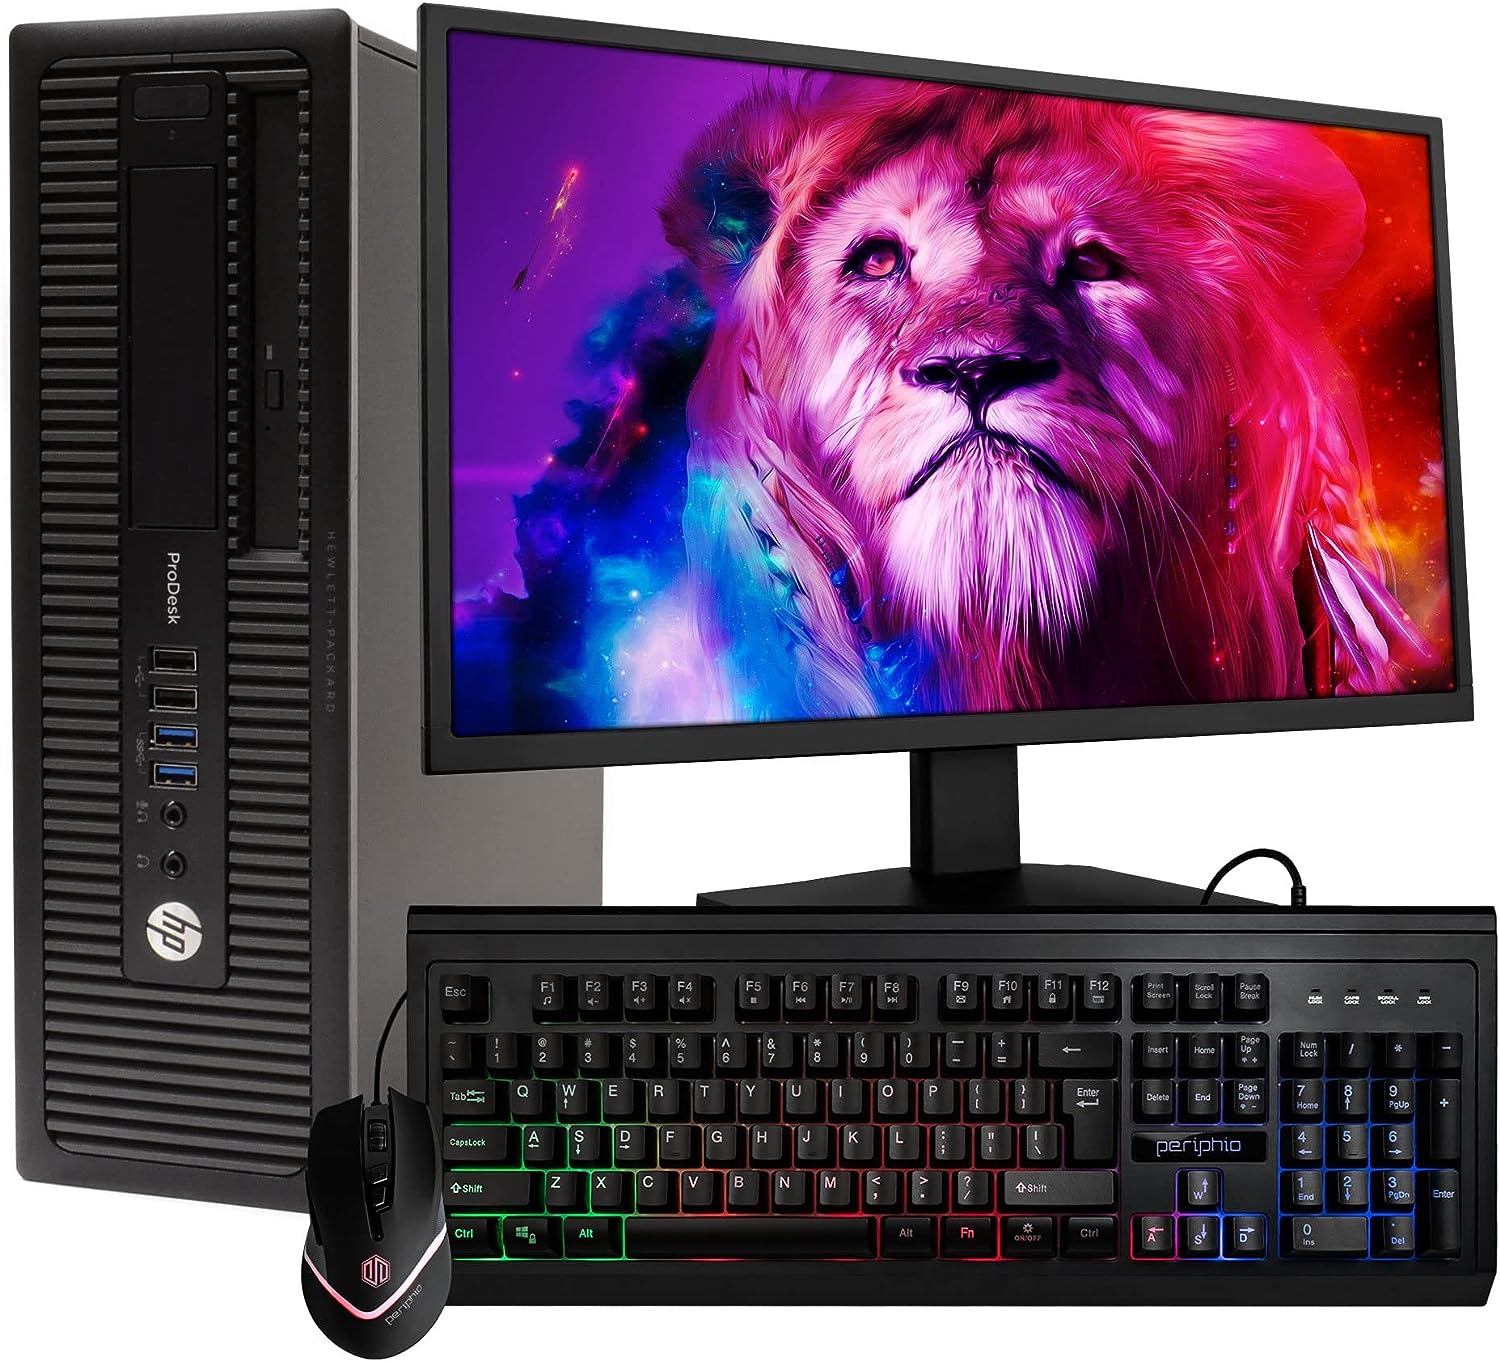 11 Best Desktop Computer With Monitor for 2023